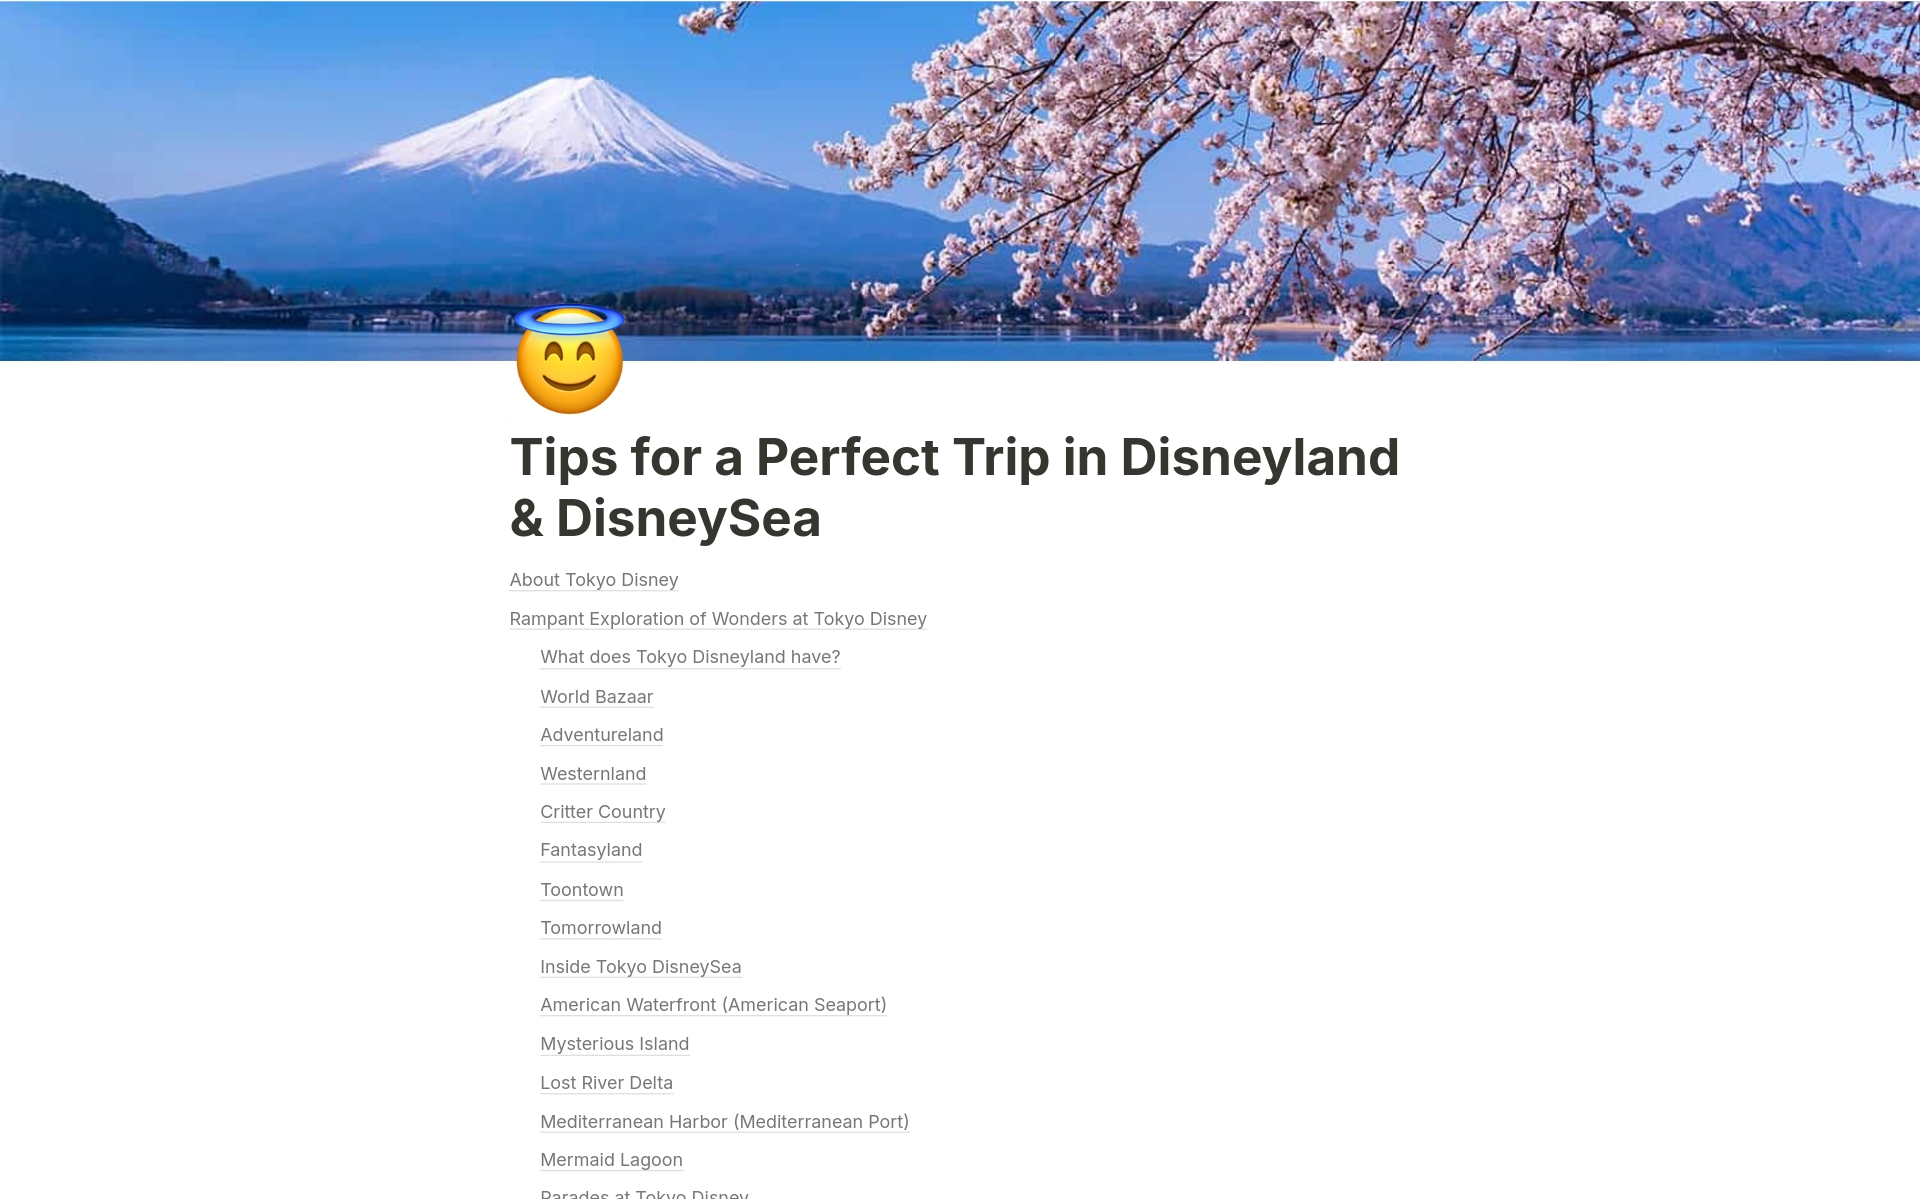 Discover Japan with our Travel Planner: local cuisine, expense estimates, a 10-day itinerary (Nagoya, Tokyo, Kyoto, Osaka), plus insider tips for Tokyo Disneyland & DisneySea. Start your dream trip now!